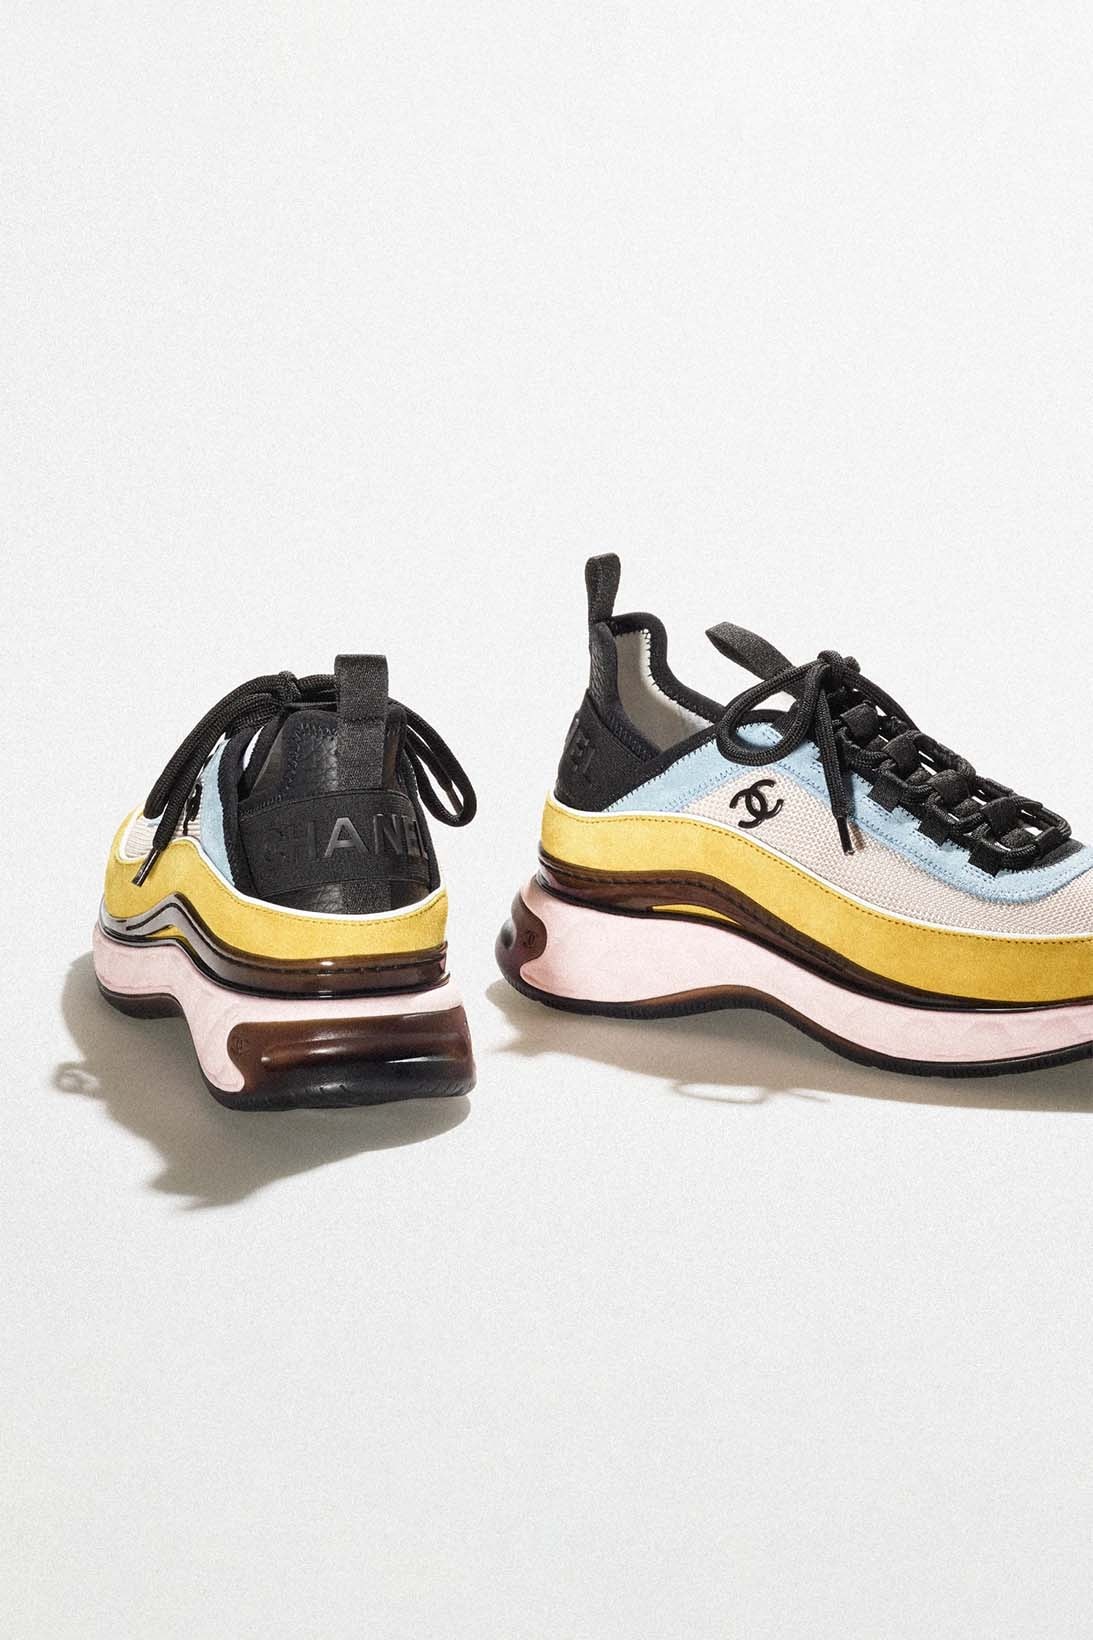 CHANEL Drops 4 New Sneakers for Fall/Winter